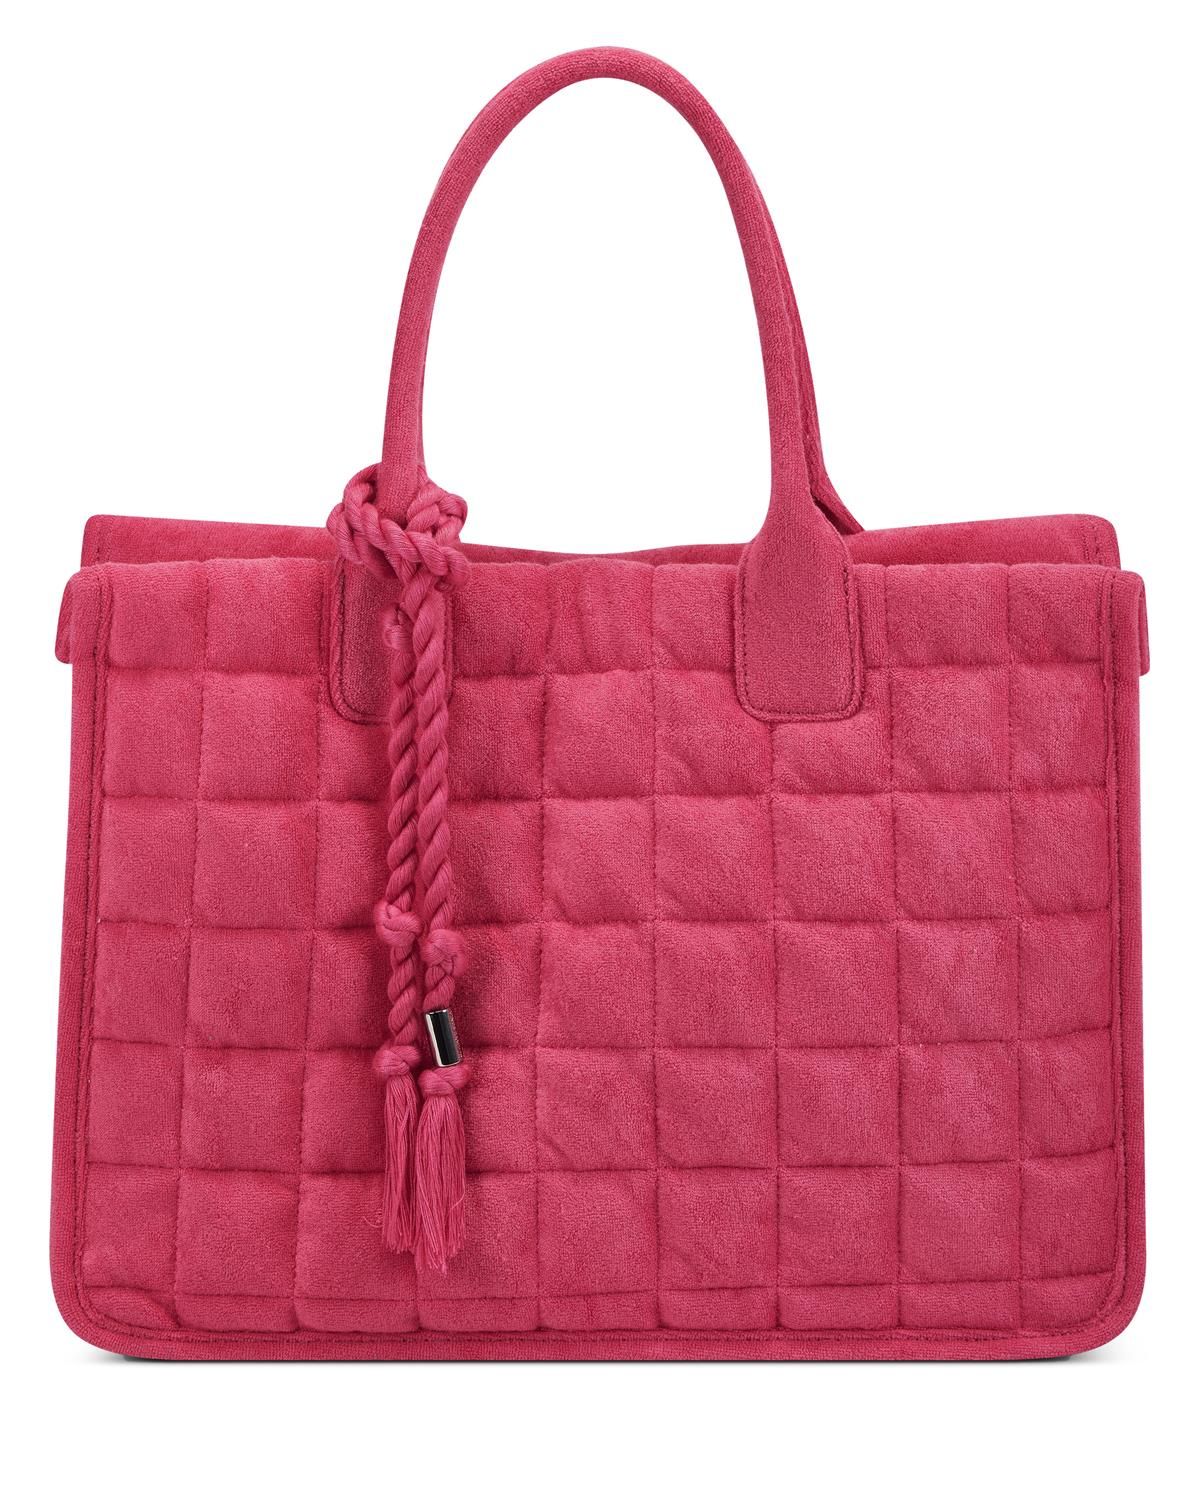 Vince Camuto Orla Tote in Electric Rose Lord & Taylor | Lord & Taylor